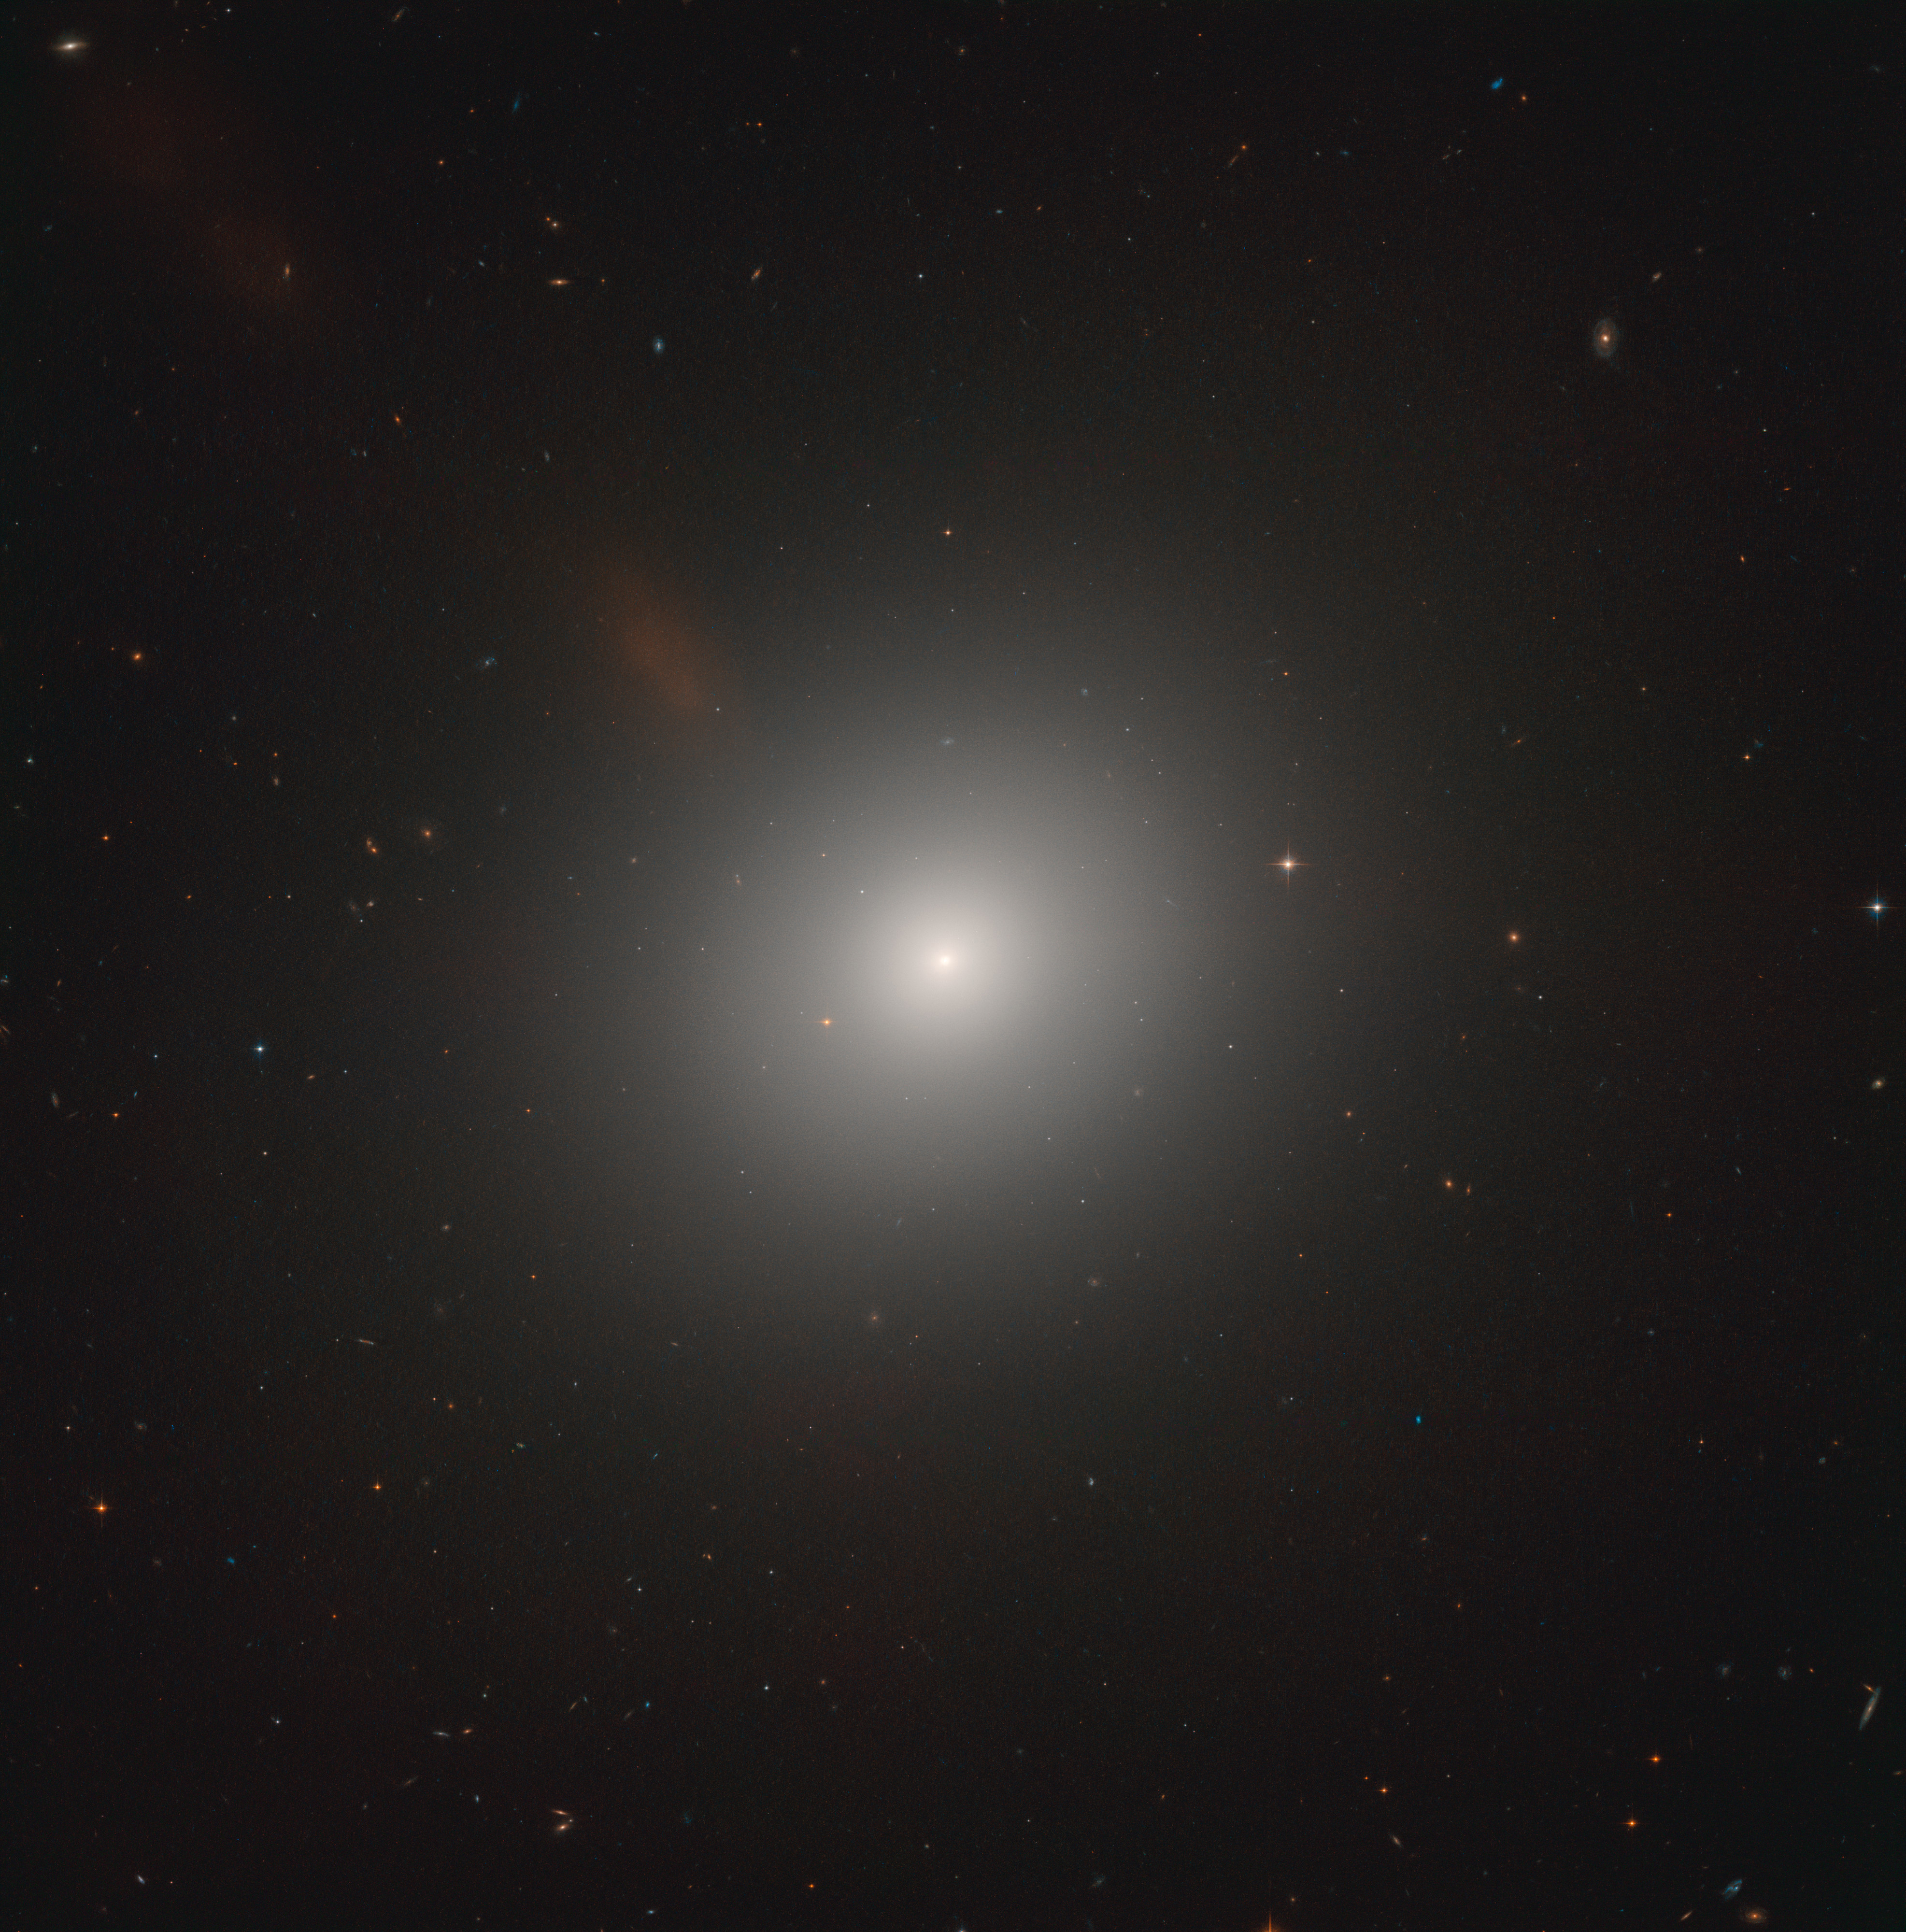 Hubble Examines an Active Galaxy Near the Lion’s Heart